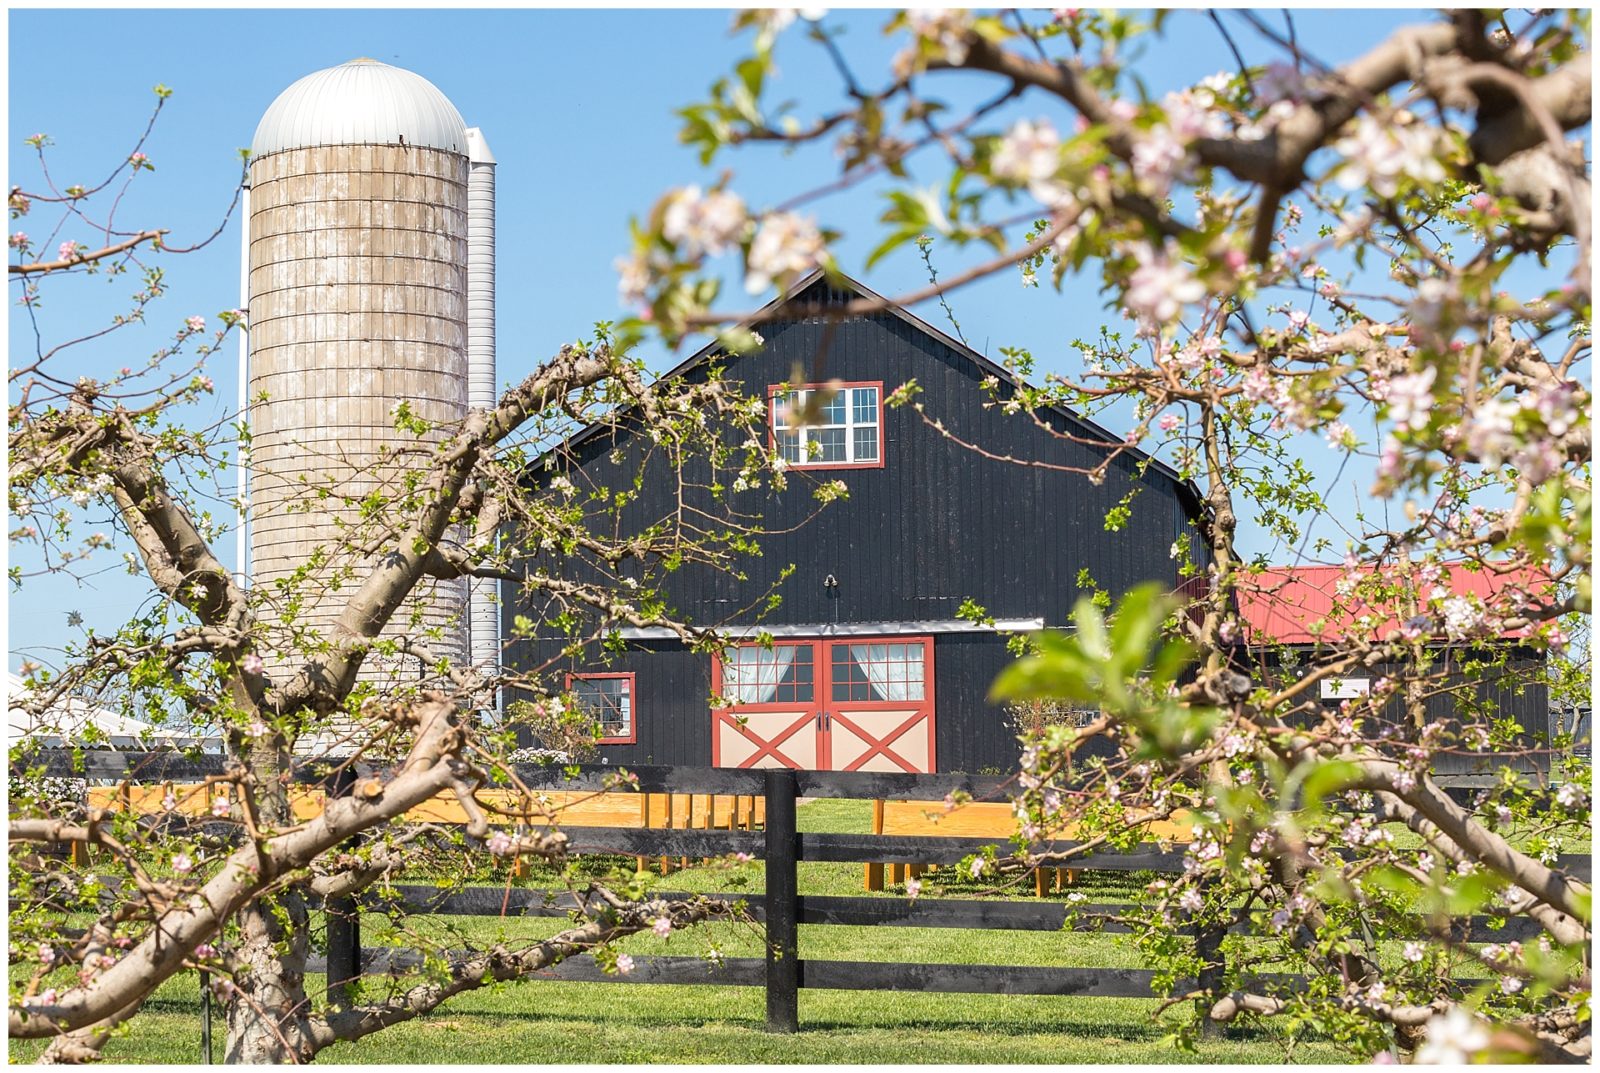 Beautiful and rustic wedding venue in Georgetown, Kentucky. The Event Barn at Evan's Orchard is an amazing option for your upcoming wedding or reception.